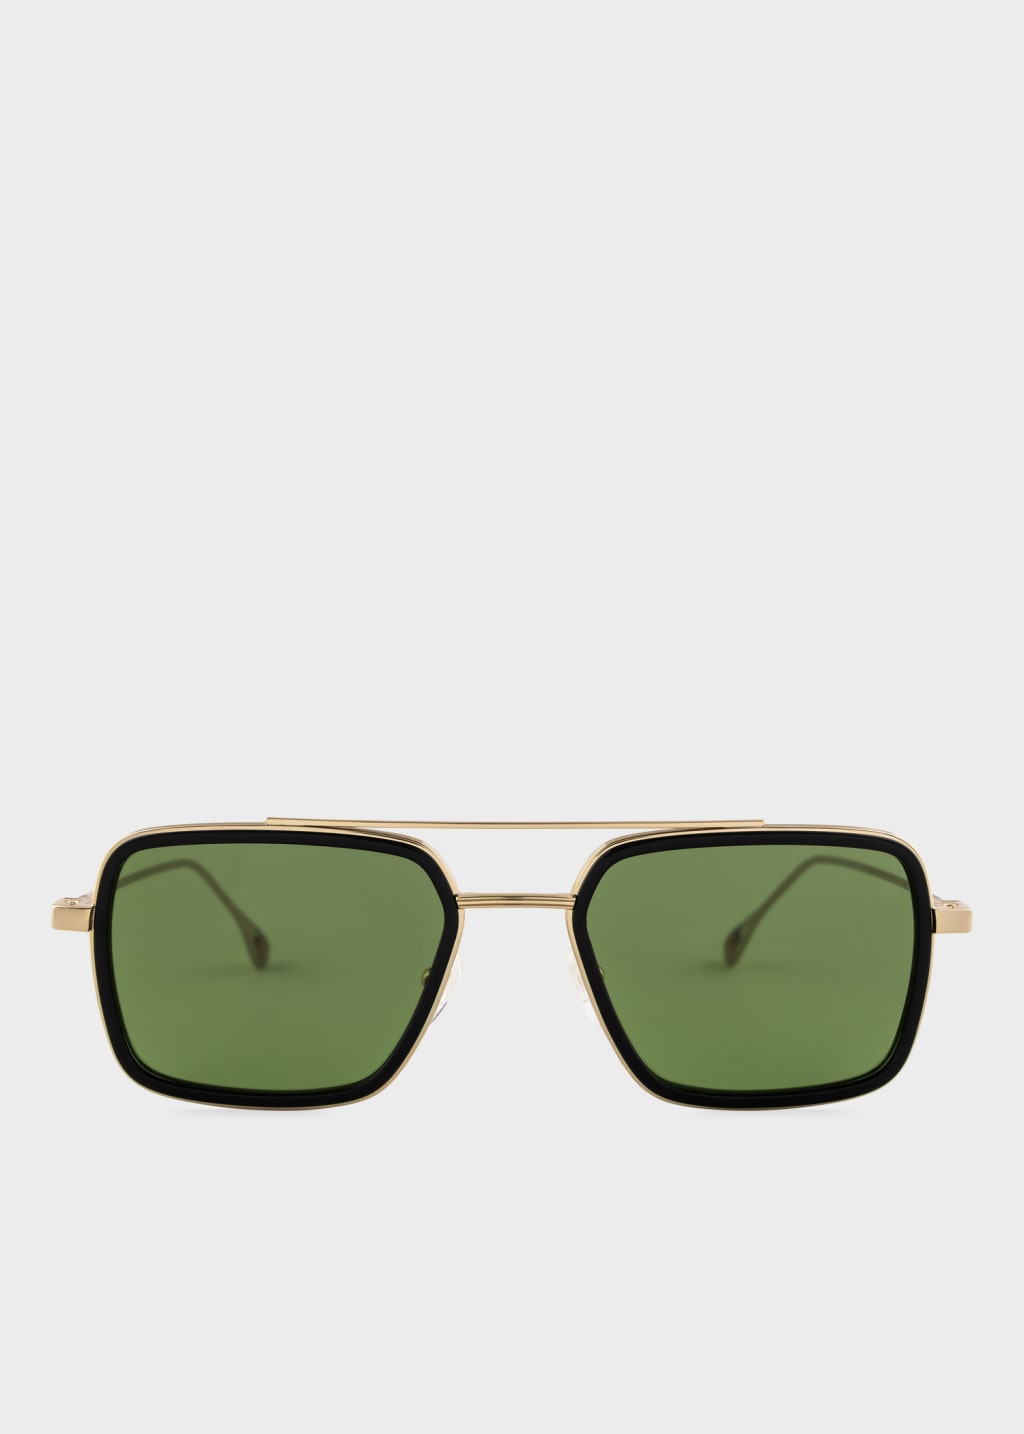 Product view - Gold and Green 'Hugon' Sunglasses by Paul Smith